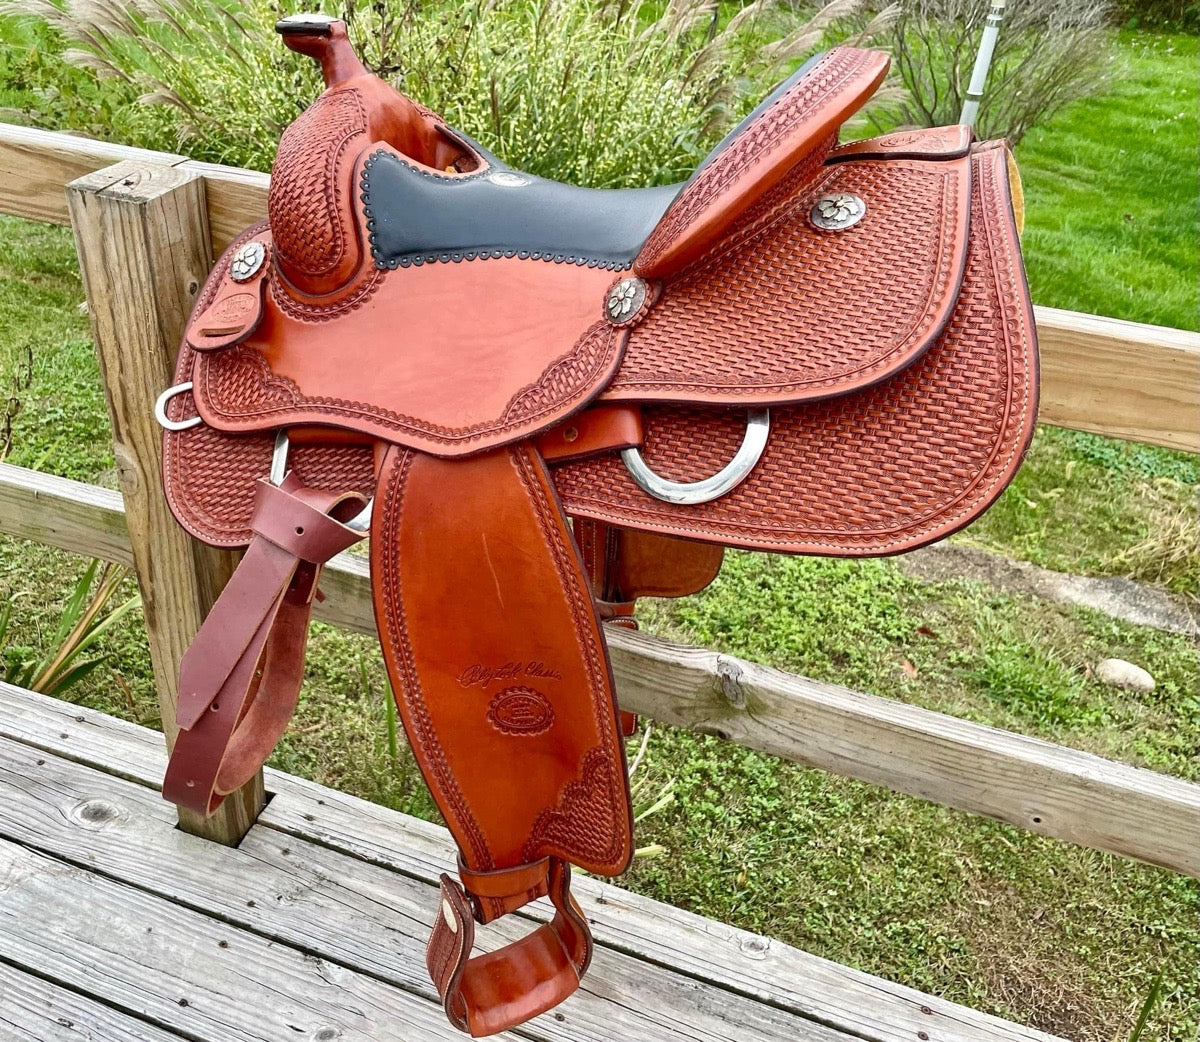 15” Reiner Billy Cook Classic Saddle Series 6005